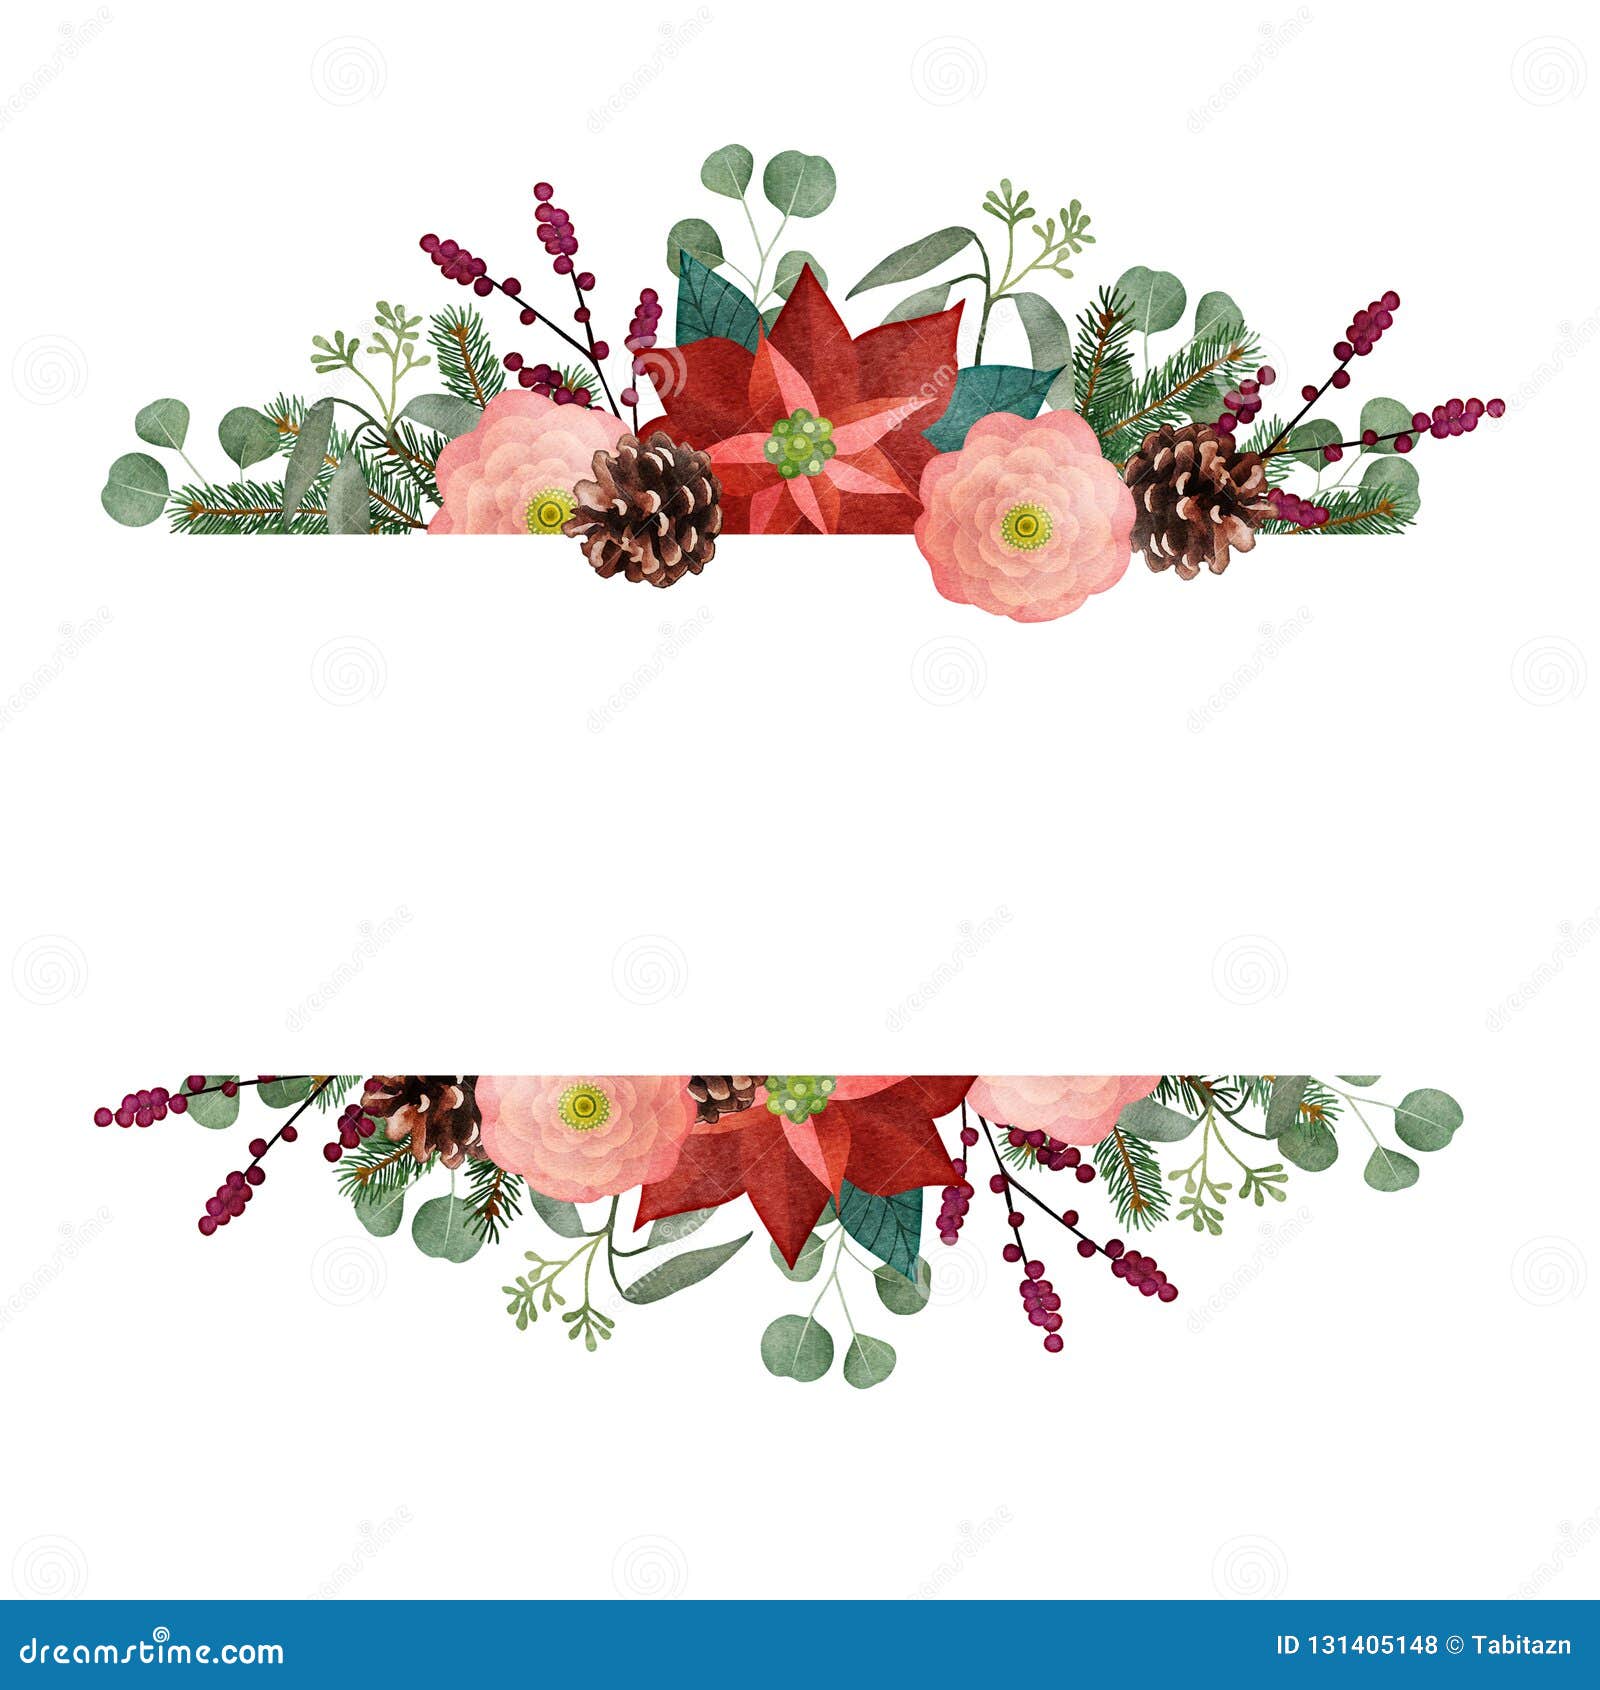 Watercolor floral clipart Christmas clipart Floral frame Christmas wreath Wedding wreath Wedding invite Fir tree branch Christmas tree PNG